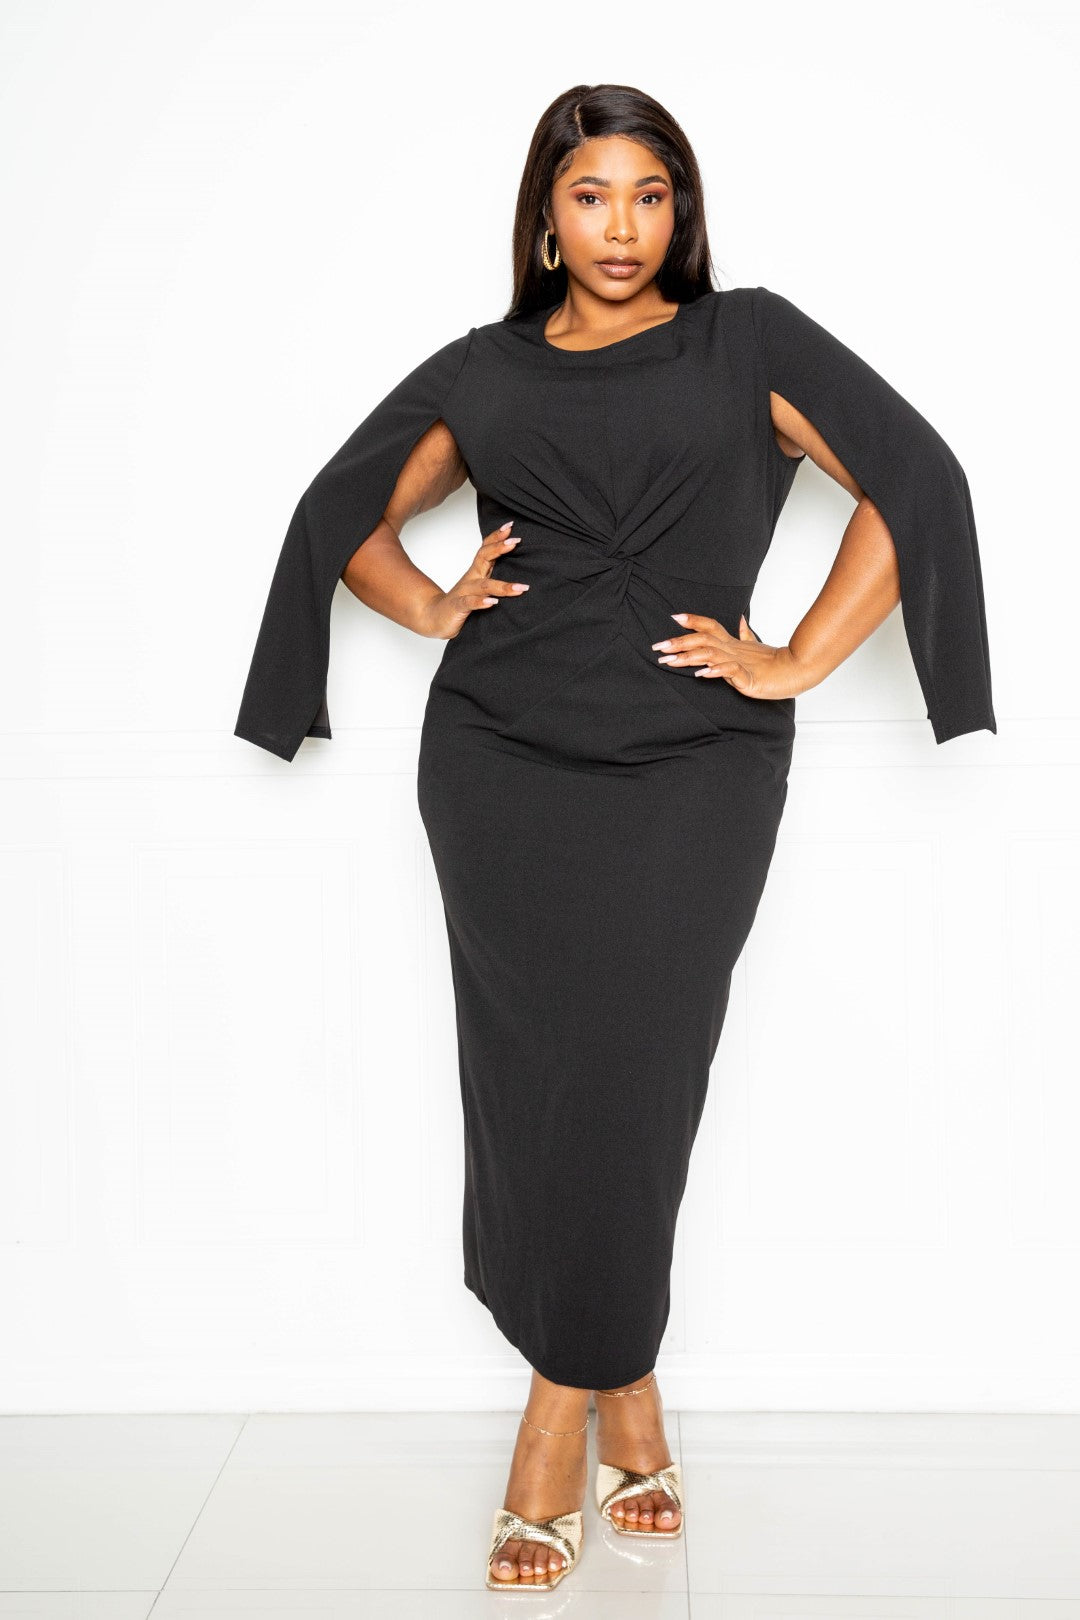 Plus Size Cape Sleeve Dress | CCPRODUCTS, NEW ARRIVALS, PLUS SIZE, PLUS SIZE DRESSES | Style Your Curves